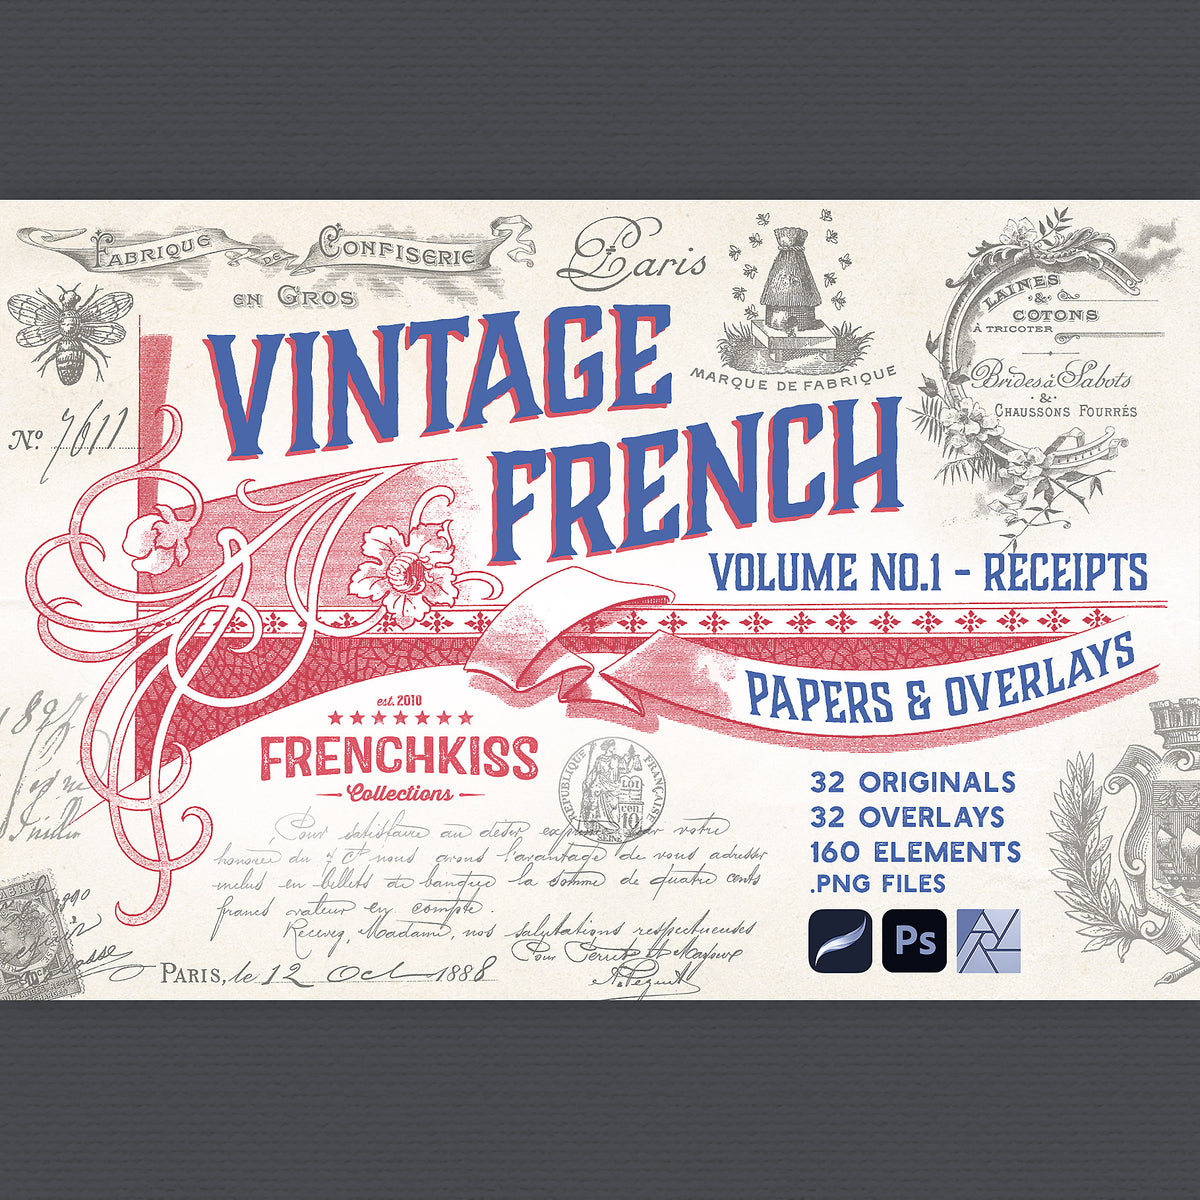 Vintage French ephemera papers, overlays and collage bits digital downloads.